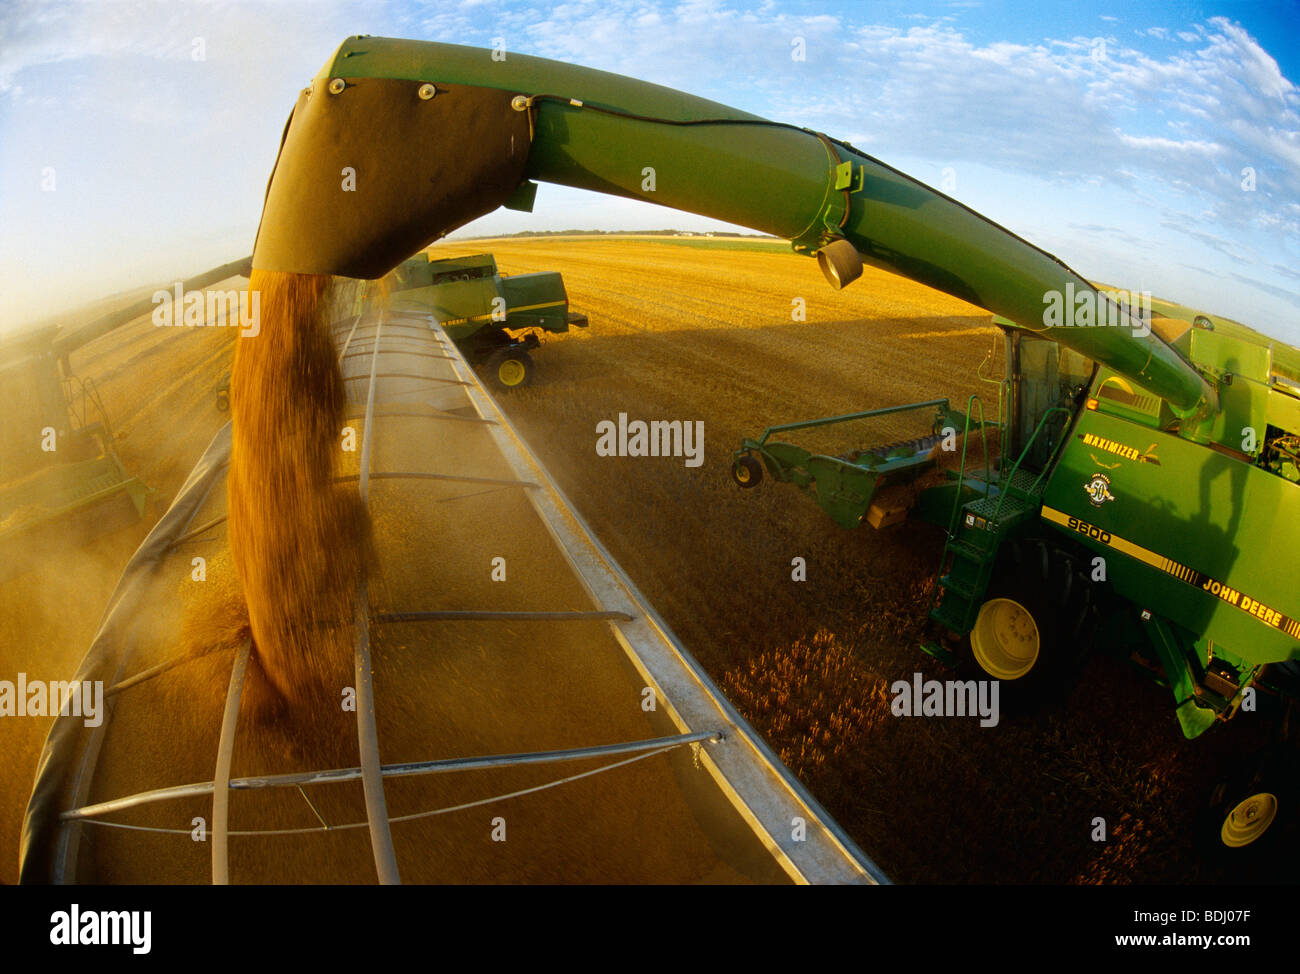 Agriculture - John Deere combines unload harvested barley into a grain truck in late afternoon light / Manitoba, Canada. Stock Photo